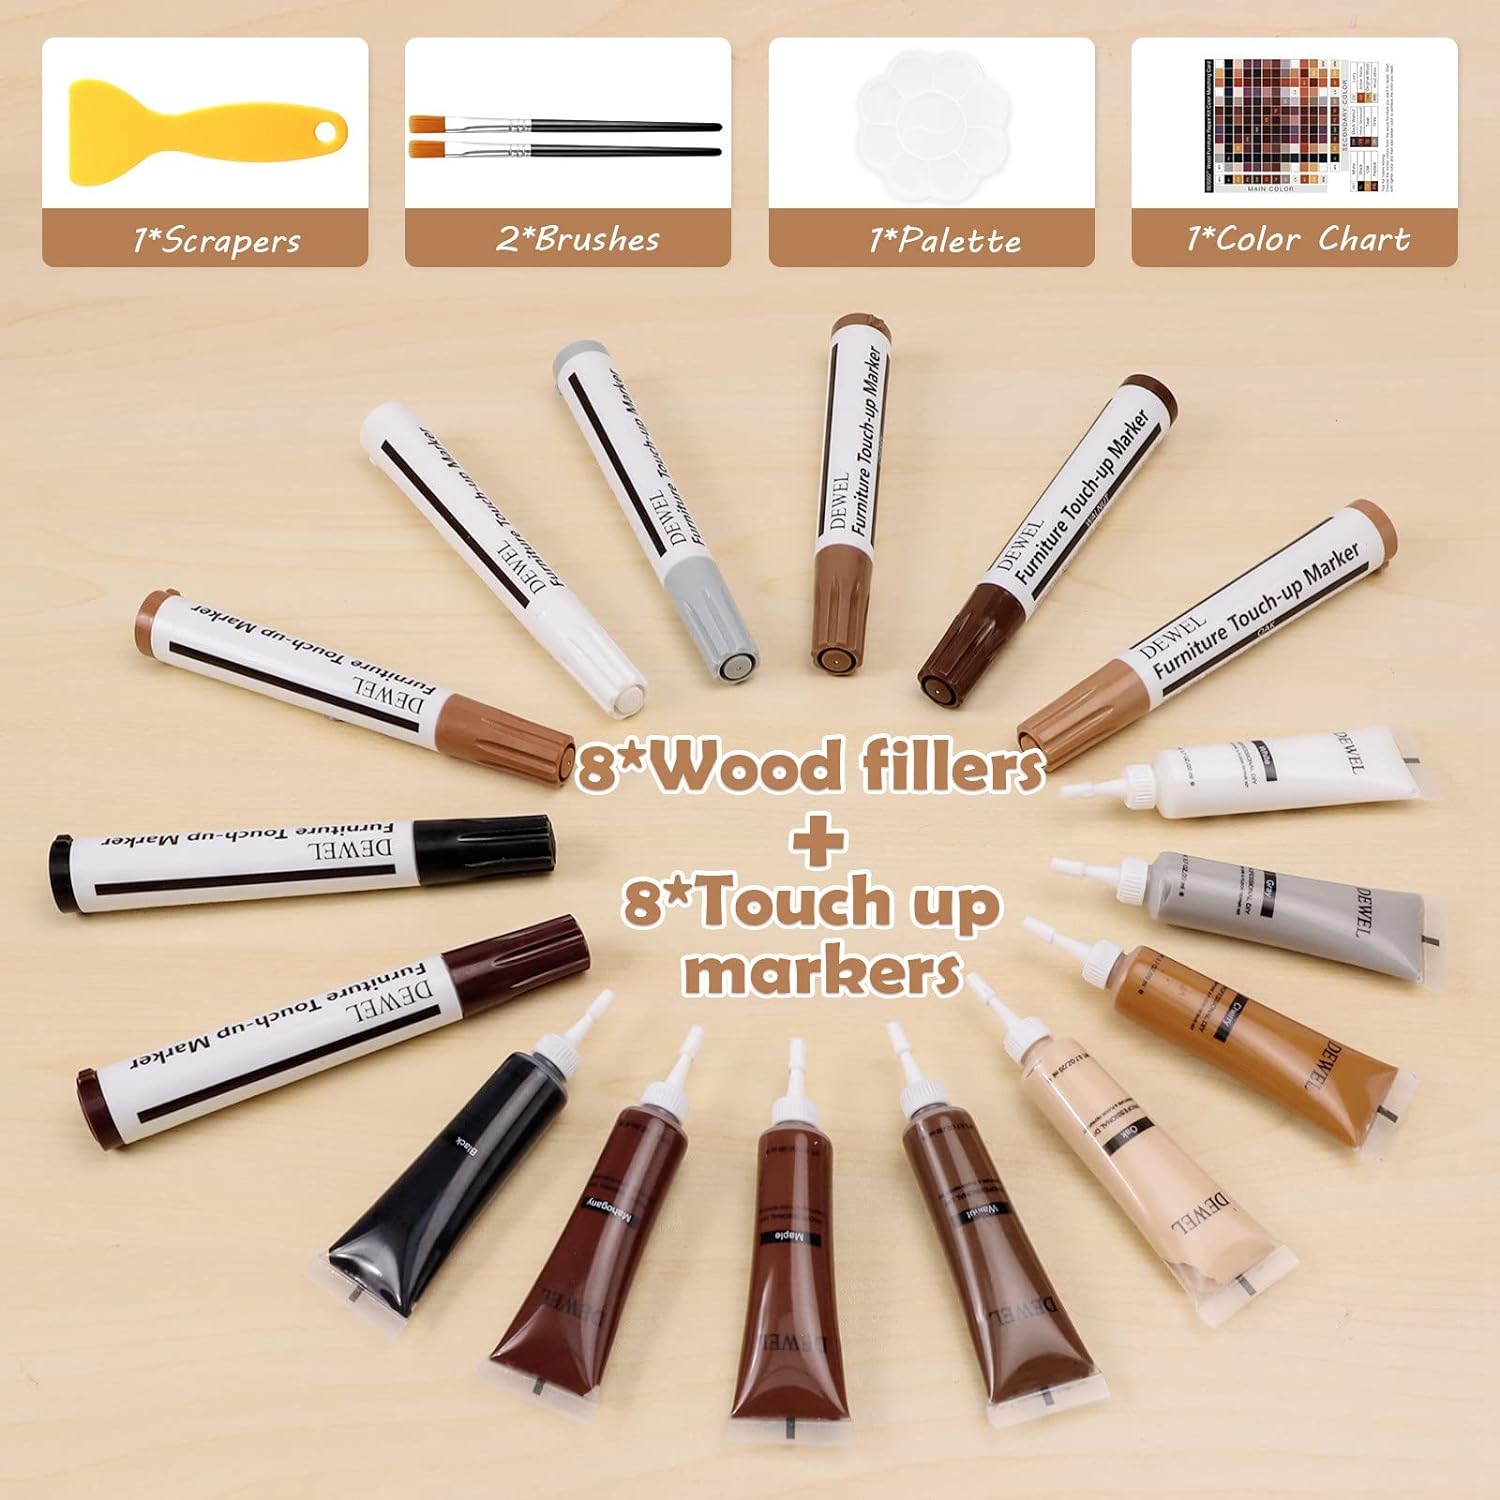 DEWEL Wood Furniture Repair Kit, Professional Wood Fillers and Furniture Touch Up Markers Repair Stains, Scratches, Wood Floors, Tables, Cabinet, Carpenters, Bedposts : Health & Household